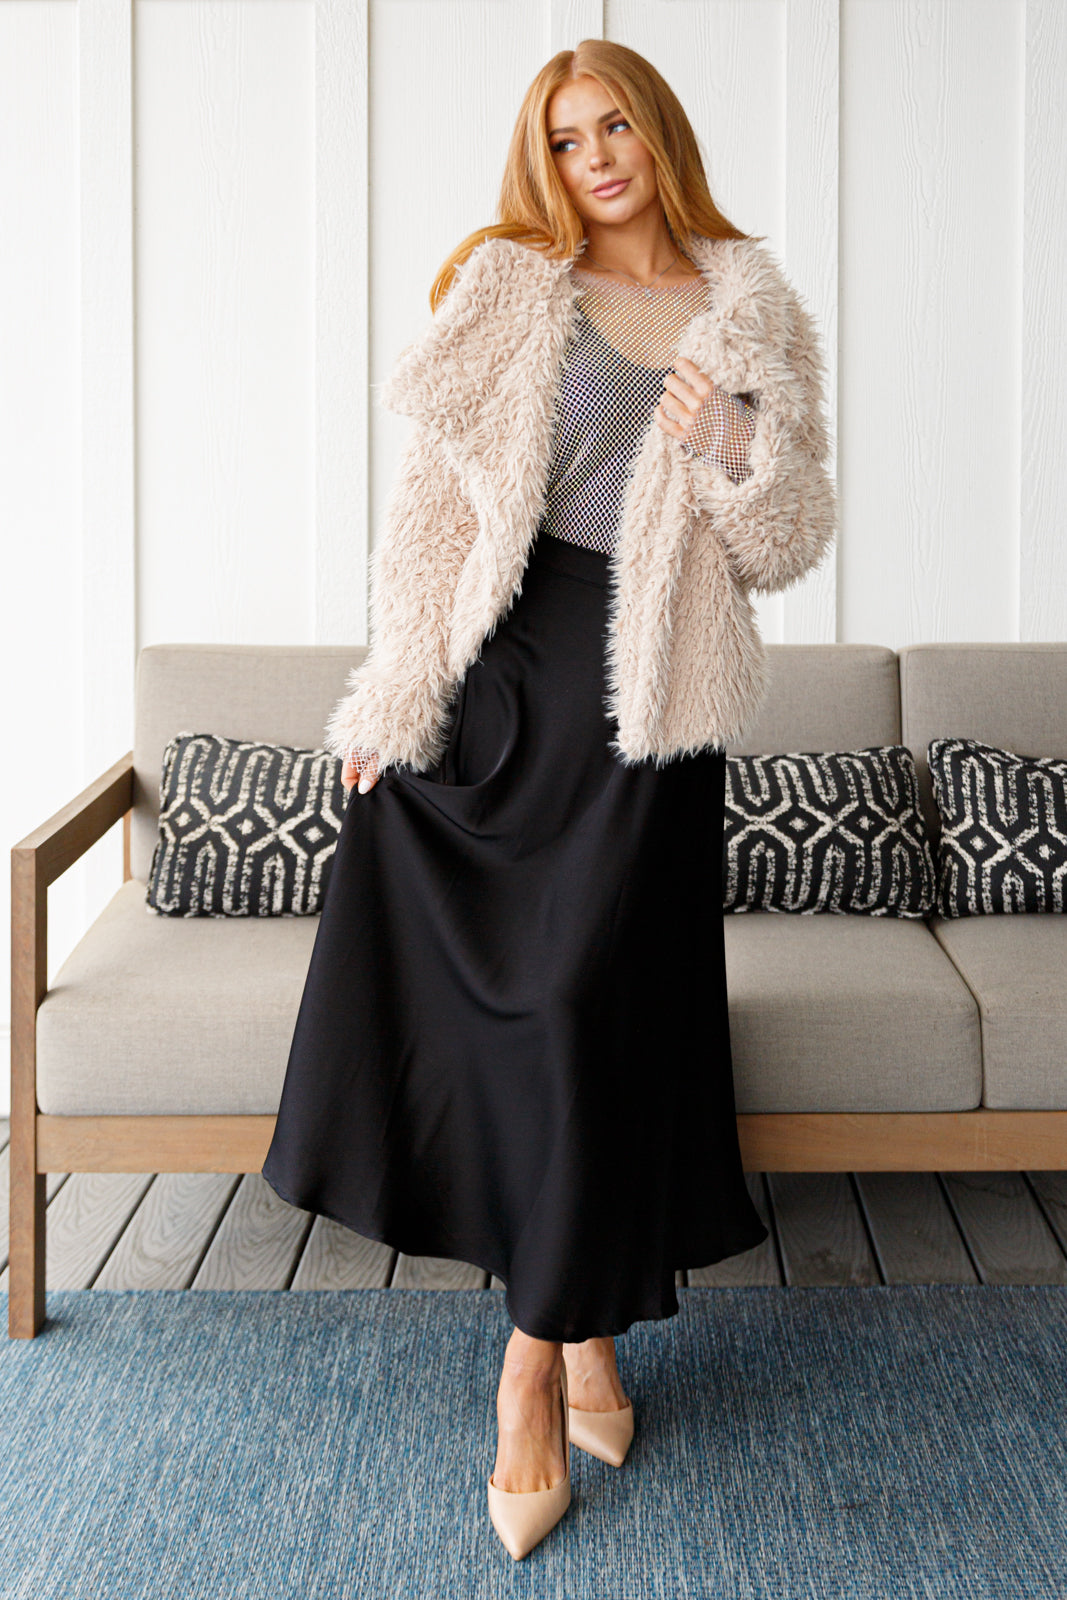 This Disco Queen Faux Fur Coat will make you shine on the dance floor! Its shaggy faux lambs fur, pockets, open front, and exaggerated fold over collar are sure to turn heads. This coat will keep you warm and stylish all night long! S - 3X